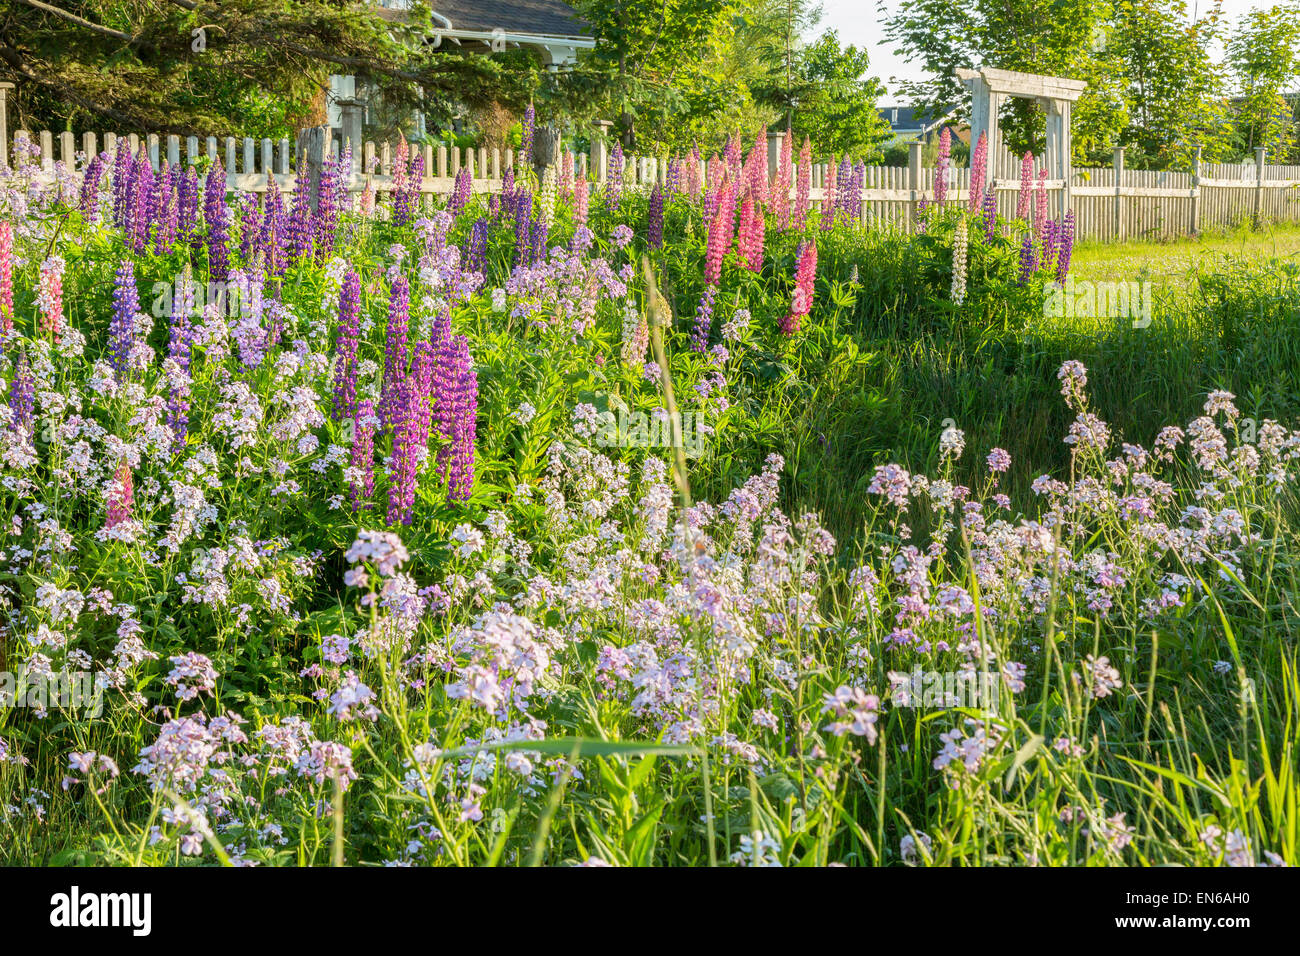 Garden of wildflowers, lupins and phlox (sweet rocket) alongside a fence. Stock Photo